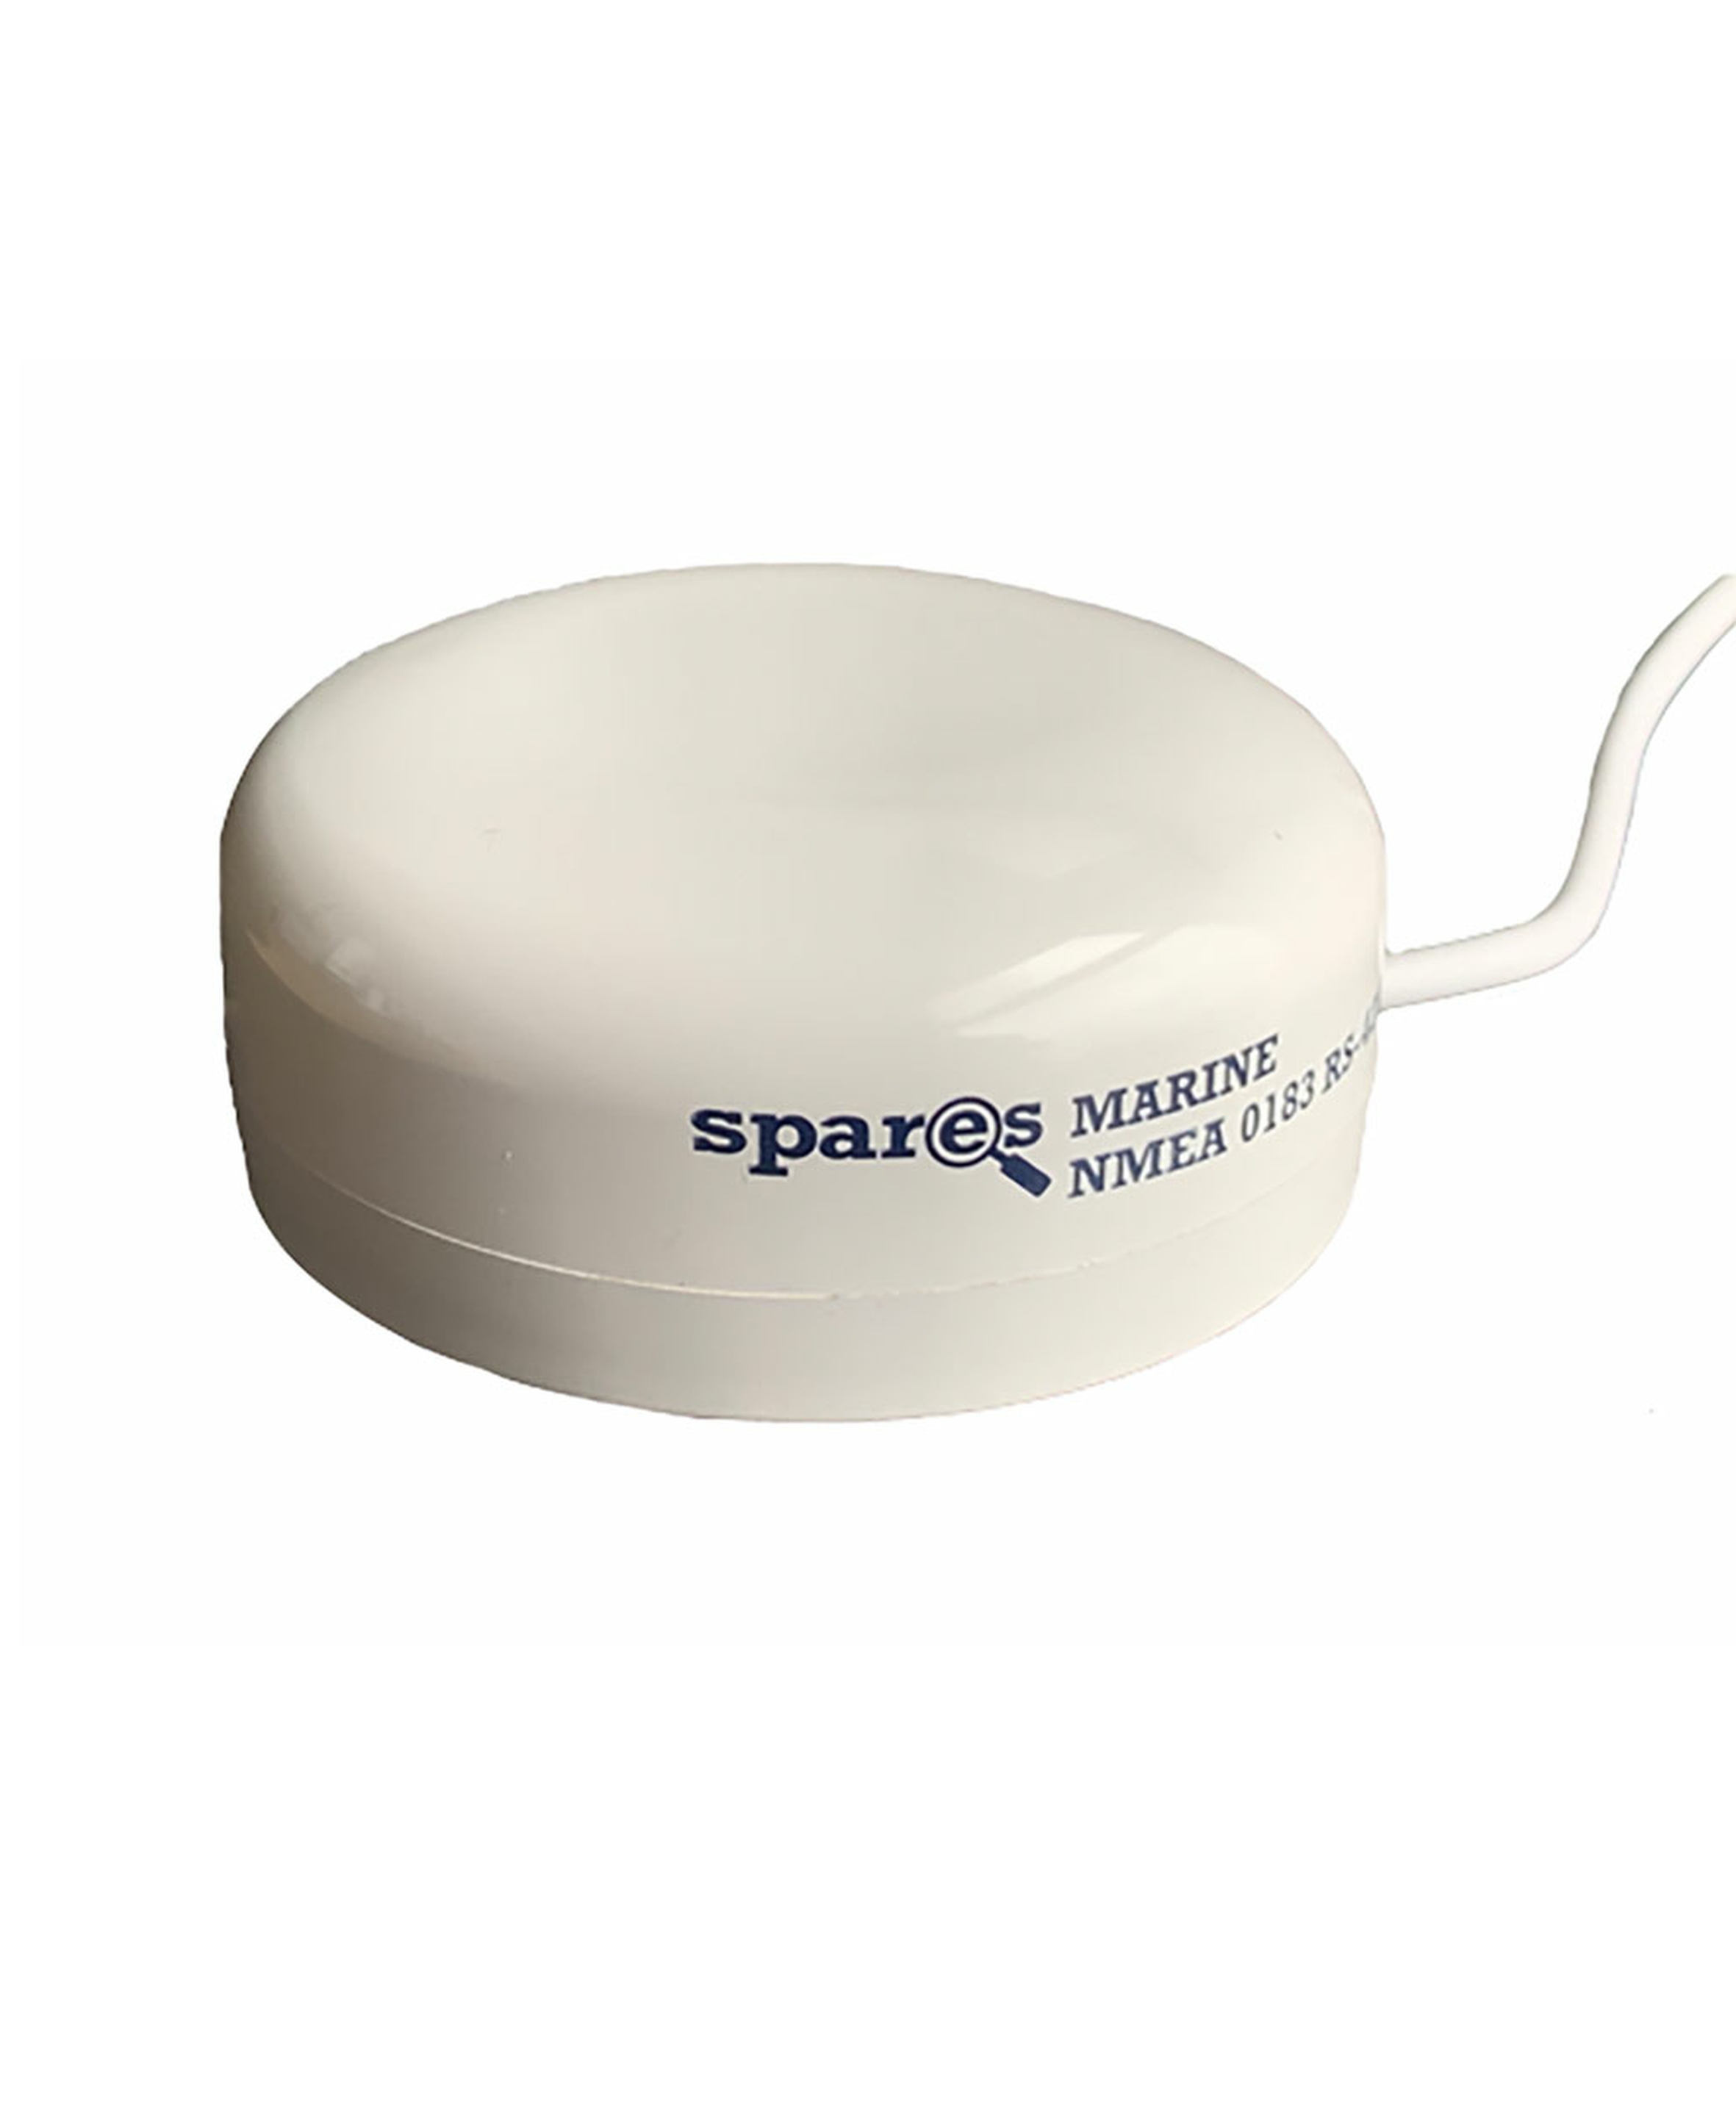 Spares Marine GPS GNSS Antenna Solutions